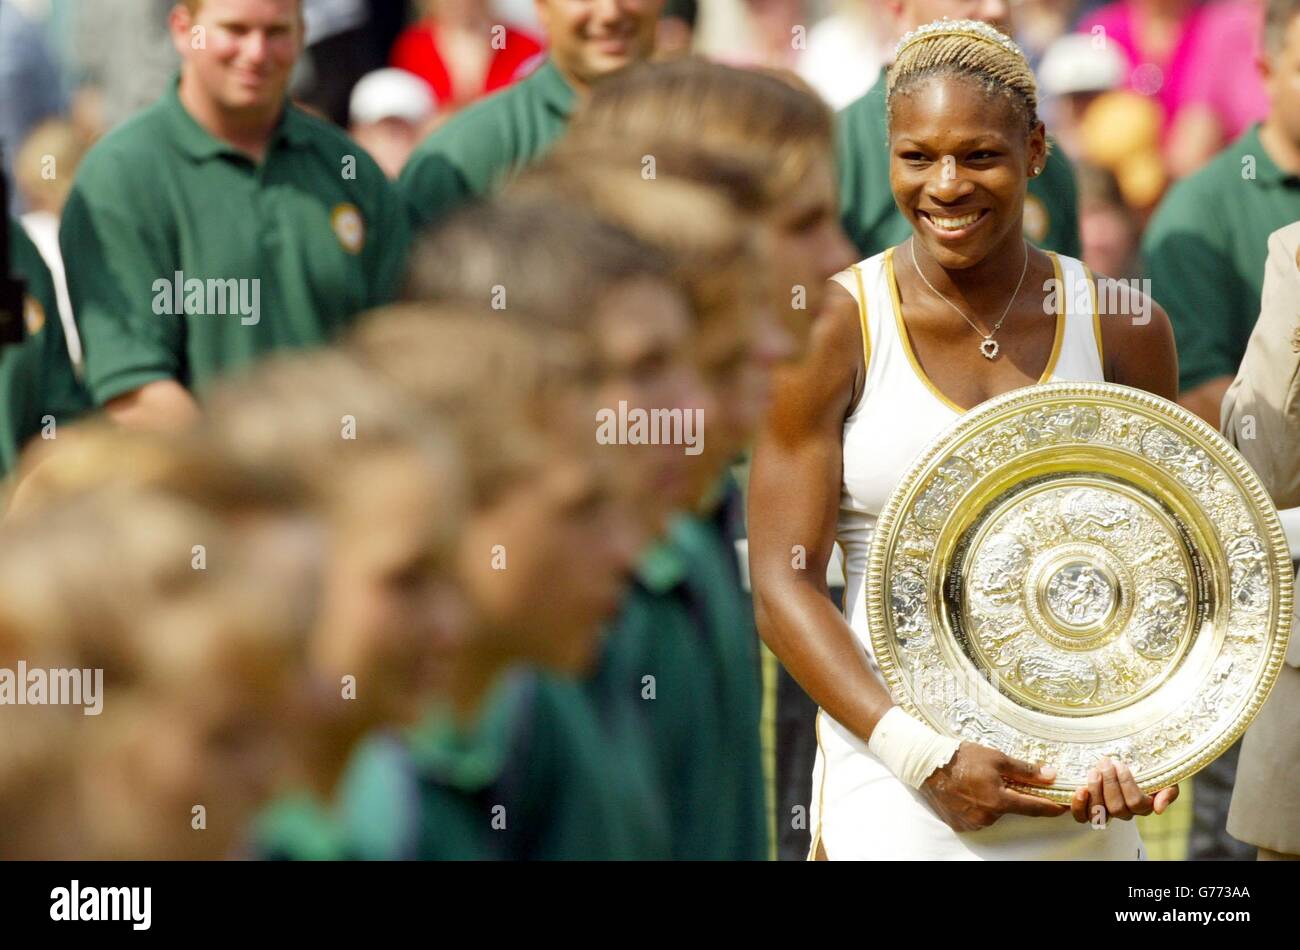 EDITORIAL USE ONLY, NO COMMERCIAL USE. Serena Williams from the USA holds her trophy after beating her sister Venus in the Ladies' Singles Final at Wimbledon. It is the first time in 118 years that sisters have met in the final at Wimbledon. Serena triumphed in straight sets 7:6/6:3. Stock Photo